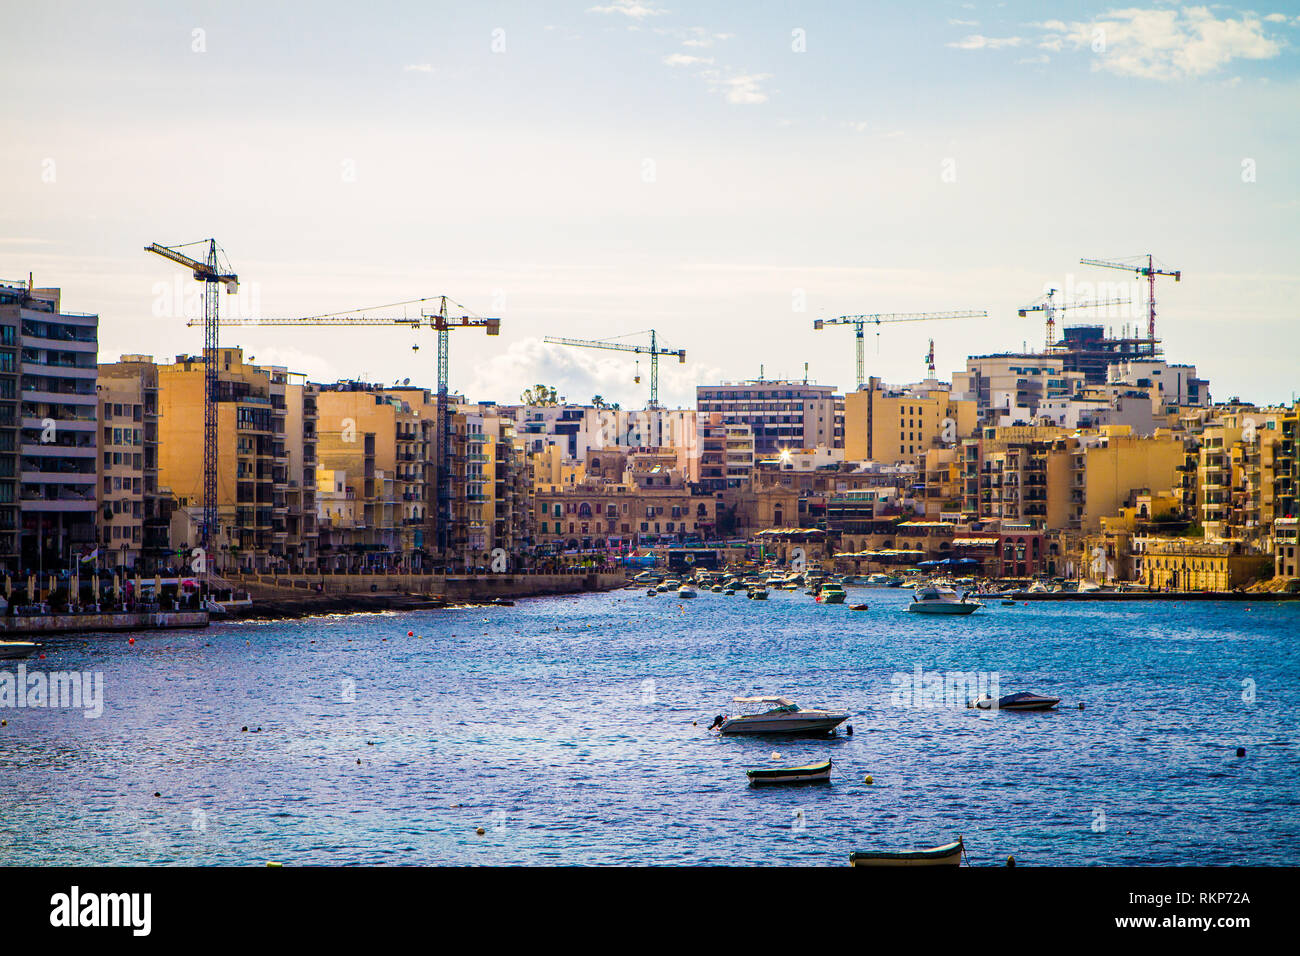 Construction on St. Julian's Bay in Malta on a sunny day Stock Photo